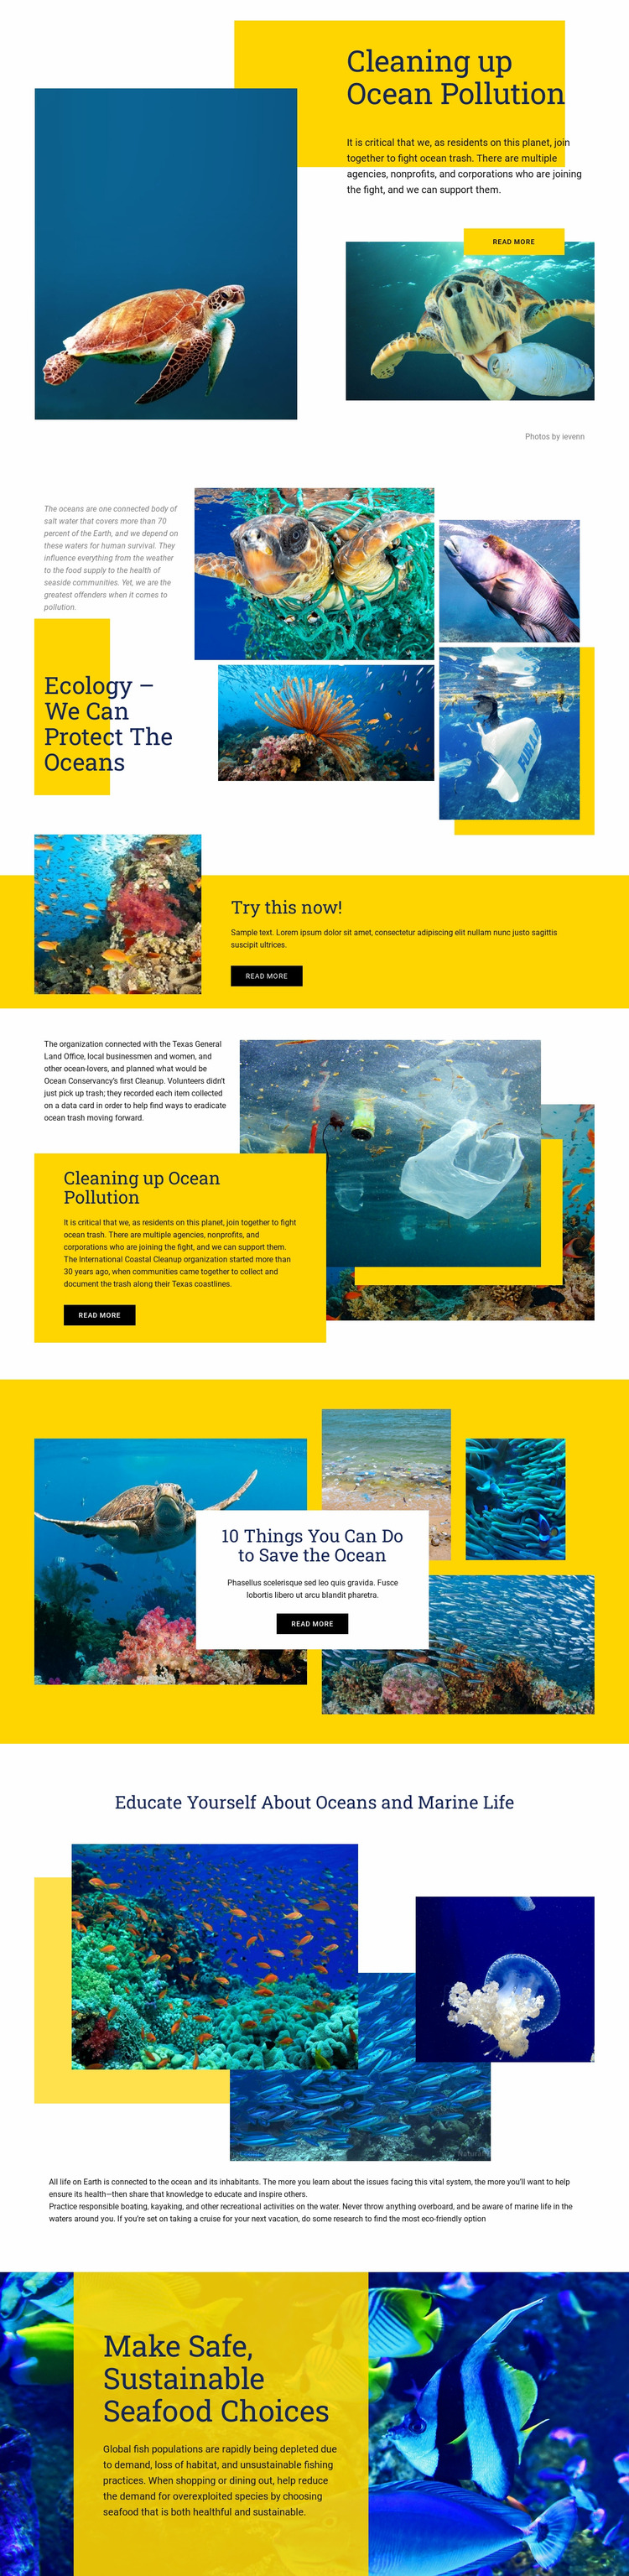 Protect The Oceans Website Mockup